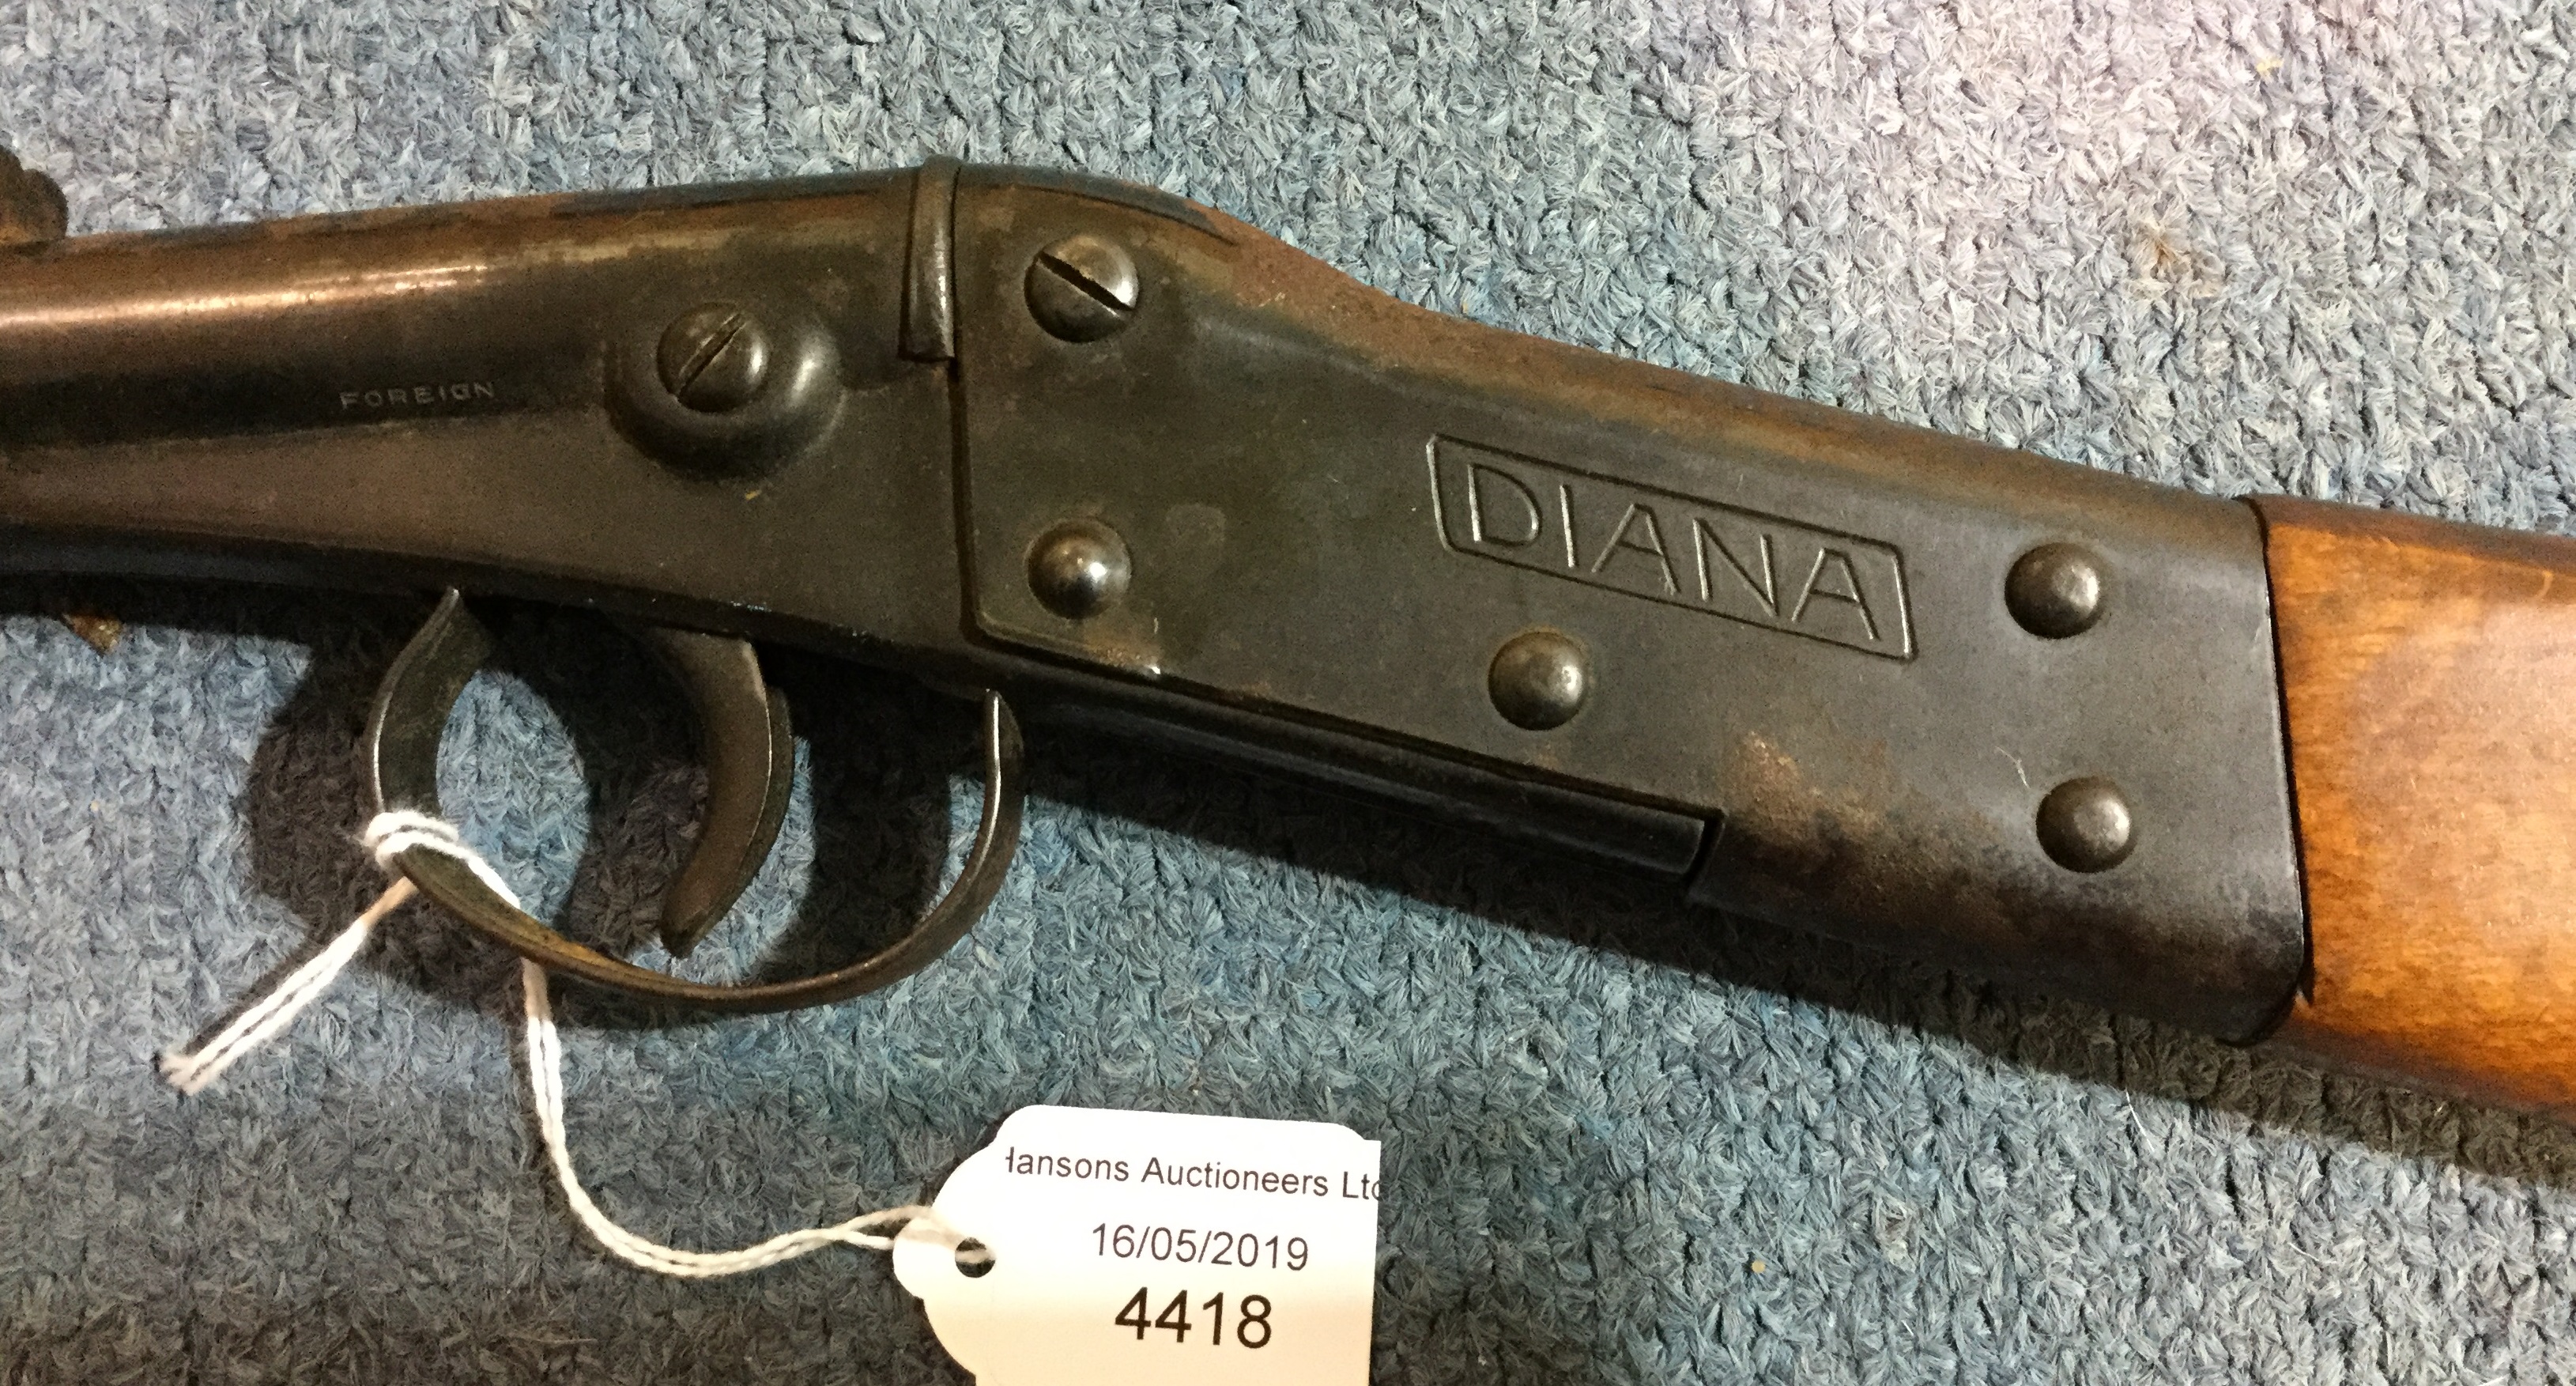 Diana Model 1 Air Rifle .177 cal. Marked "Foreign". Much original finish remaining. Working order. - Image 2 of 3